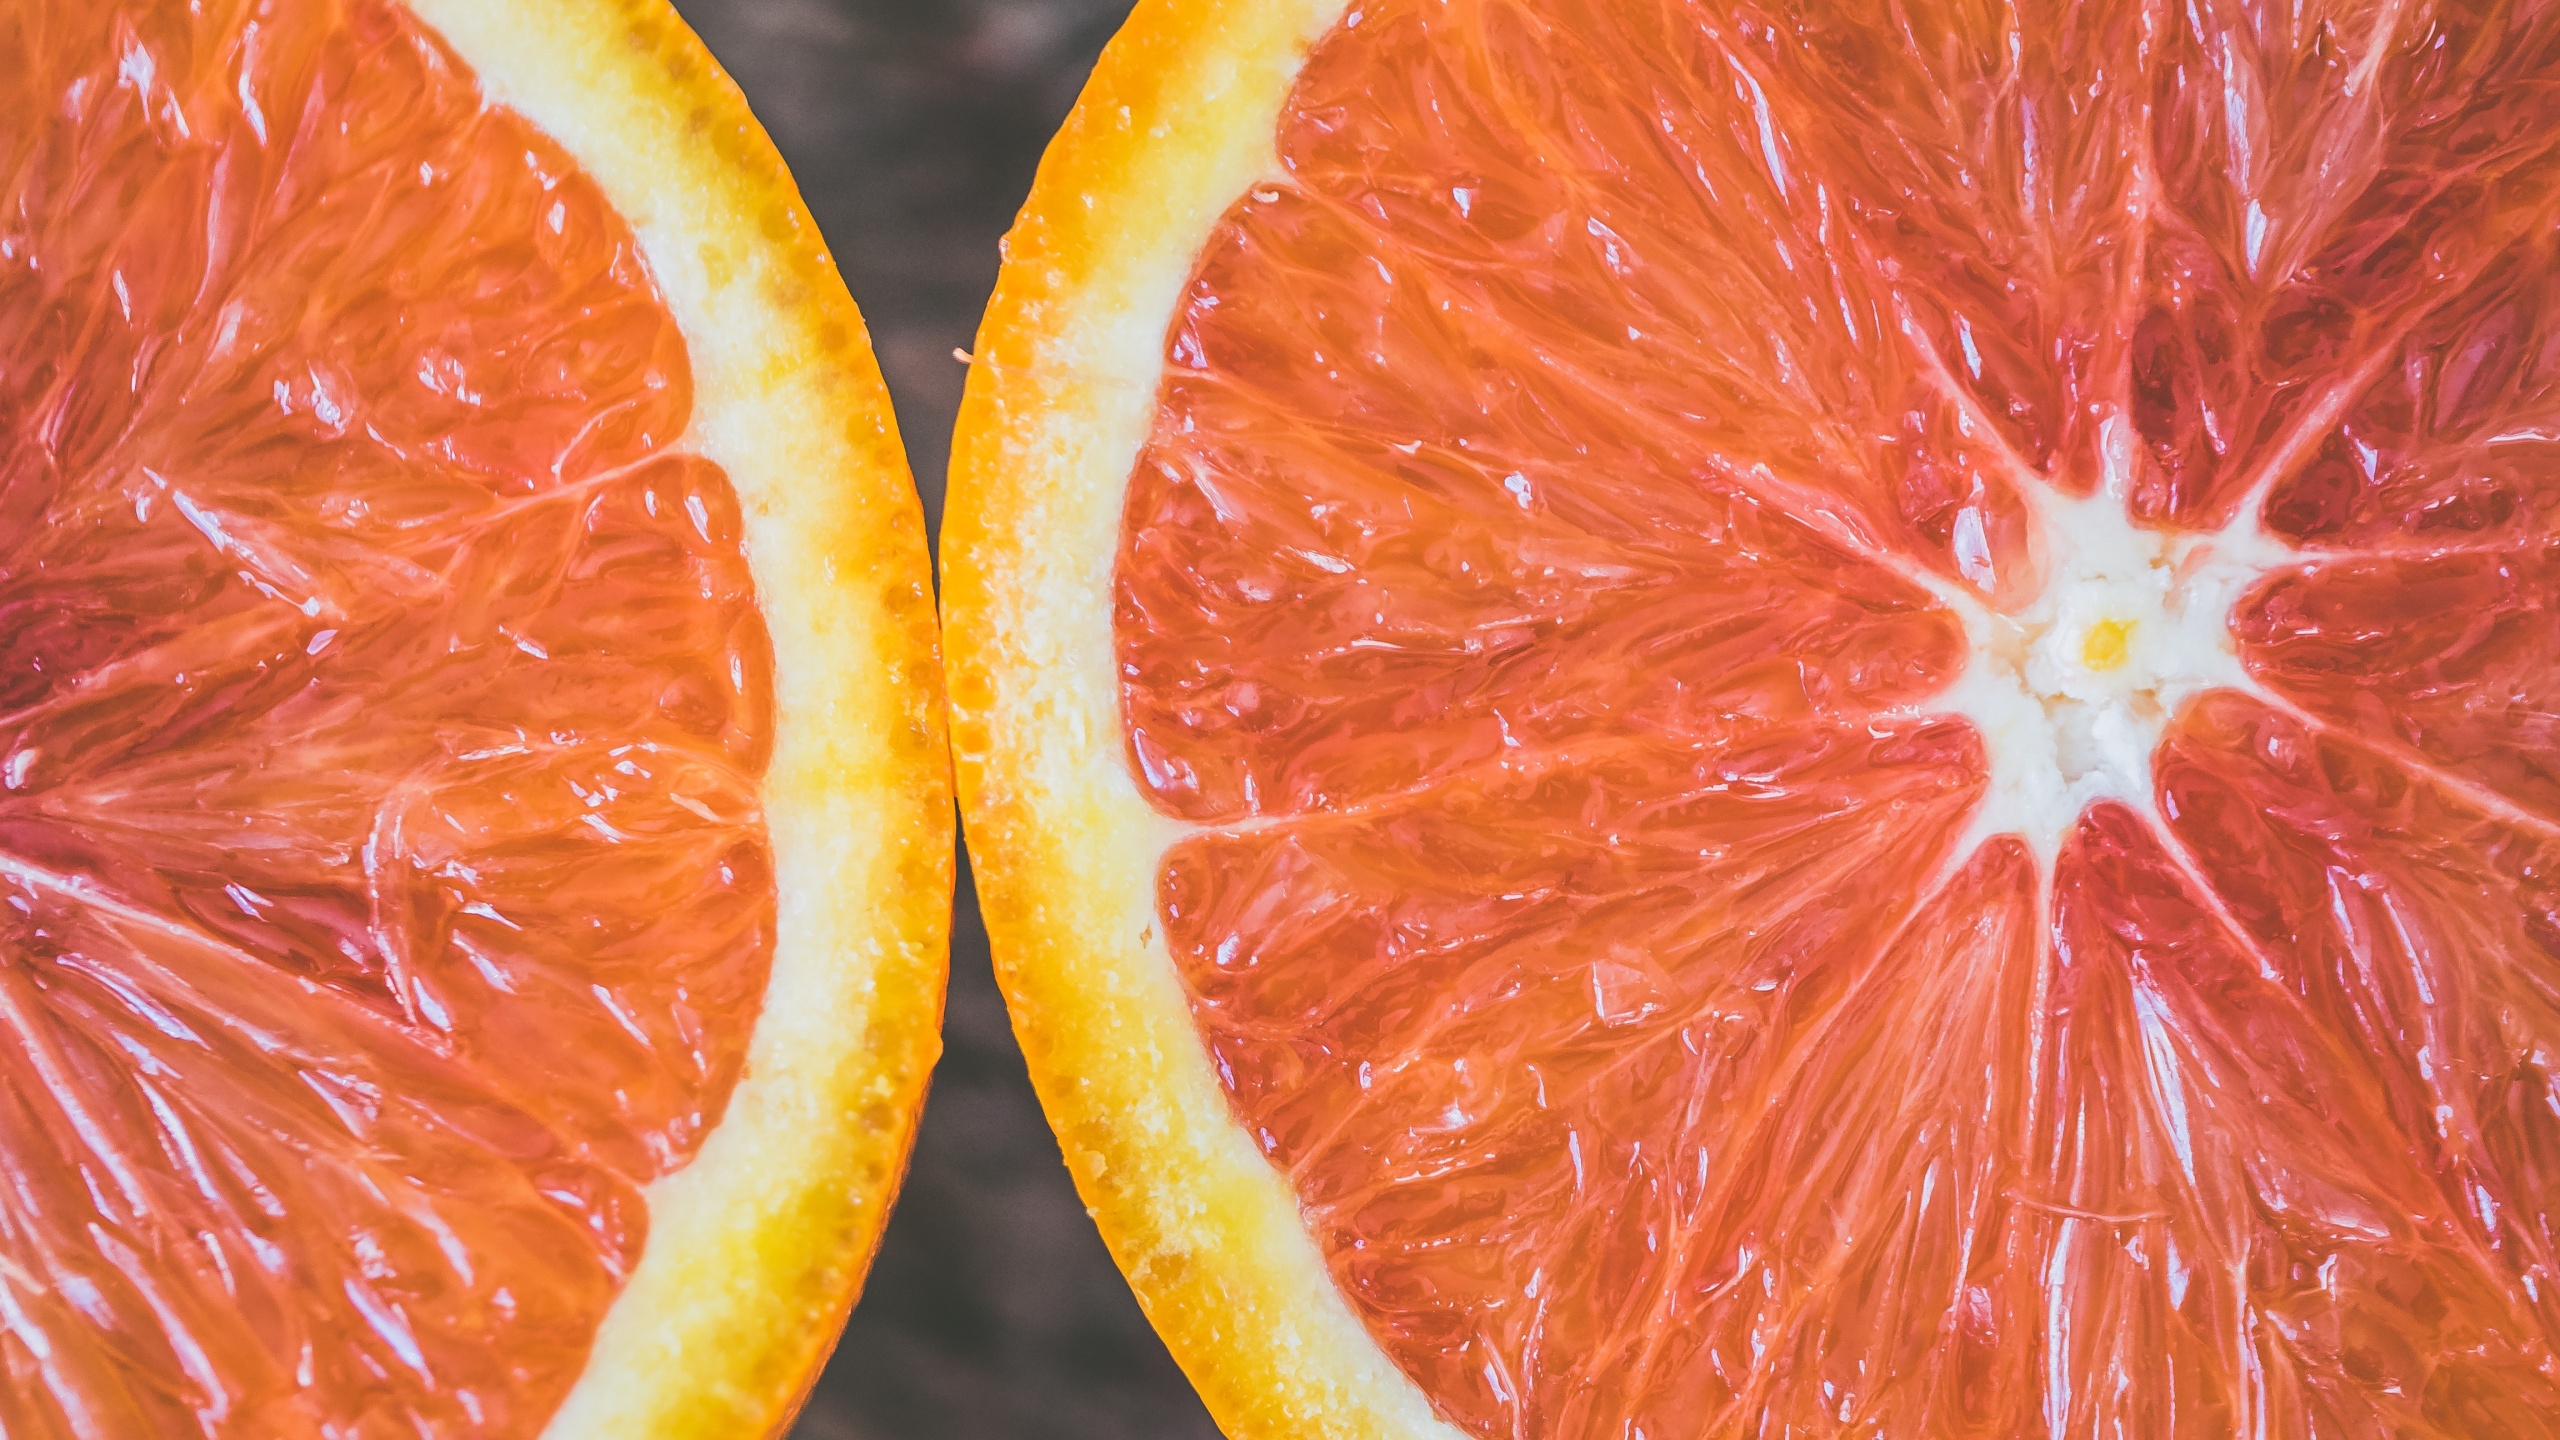 Sliced Orange Fruit in Close up Photography. Wallpaper in 2560x1440 Resolution